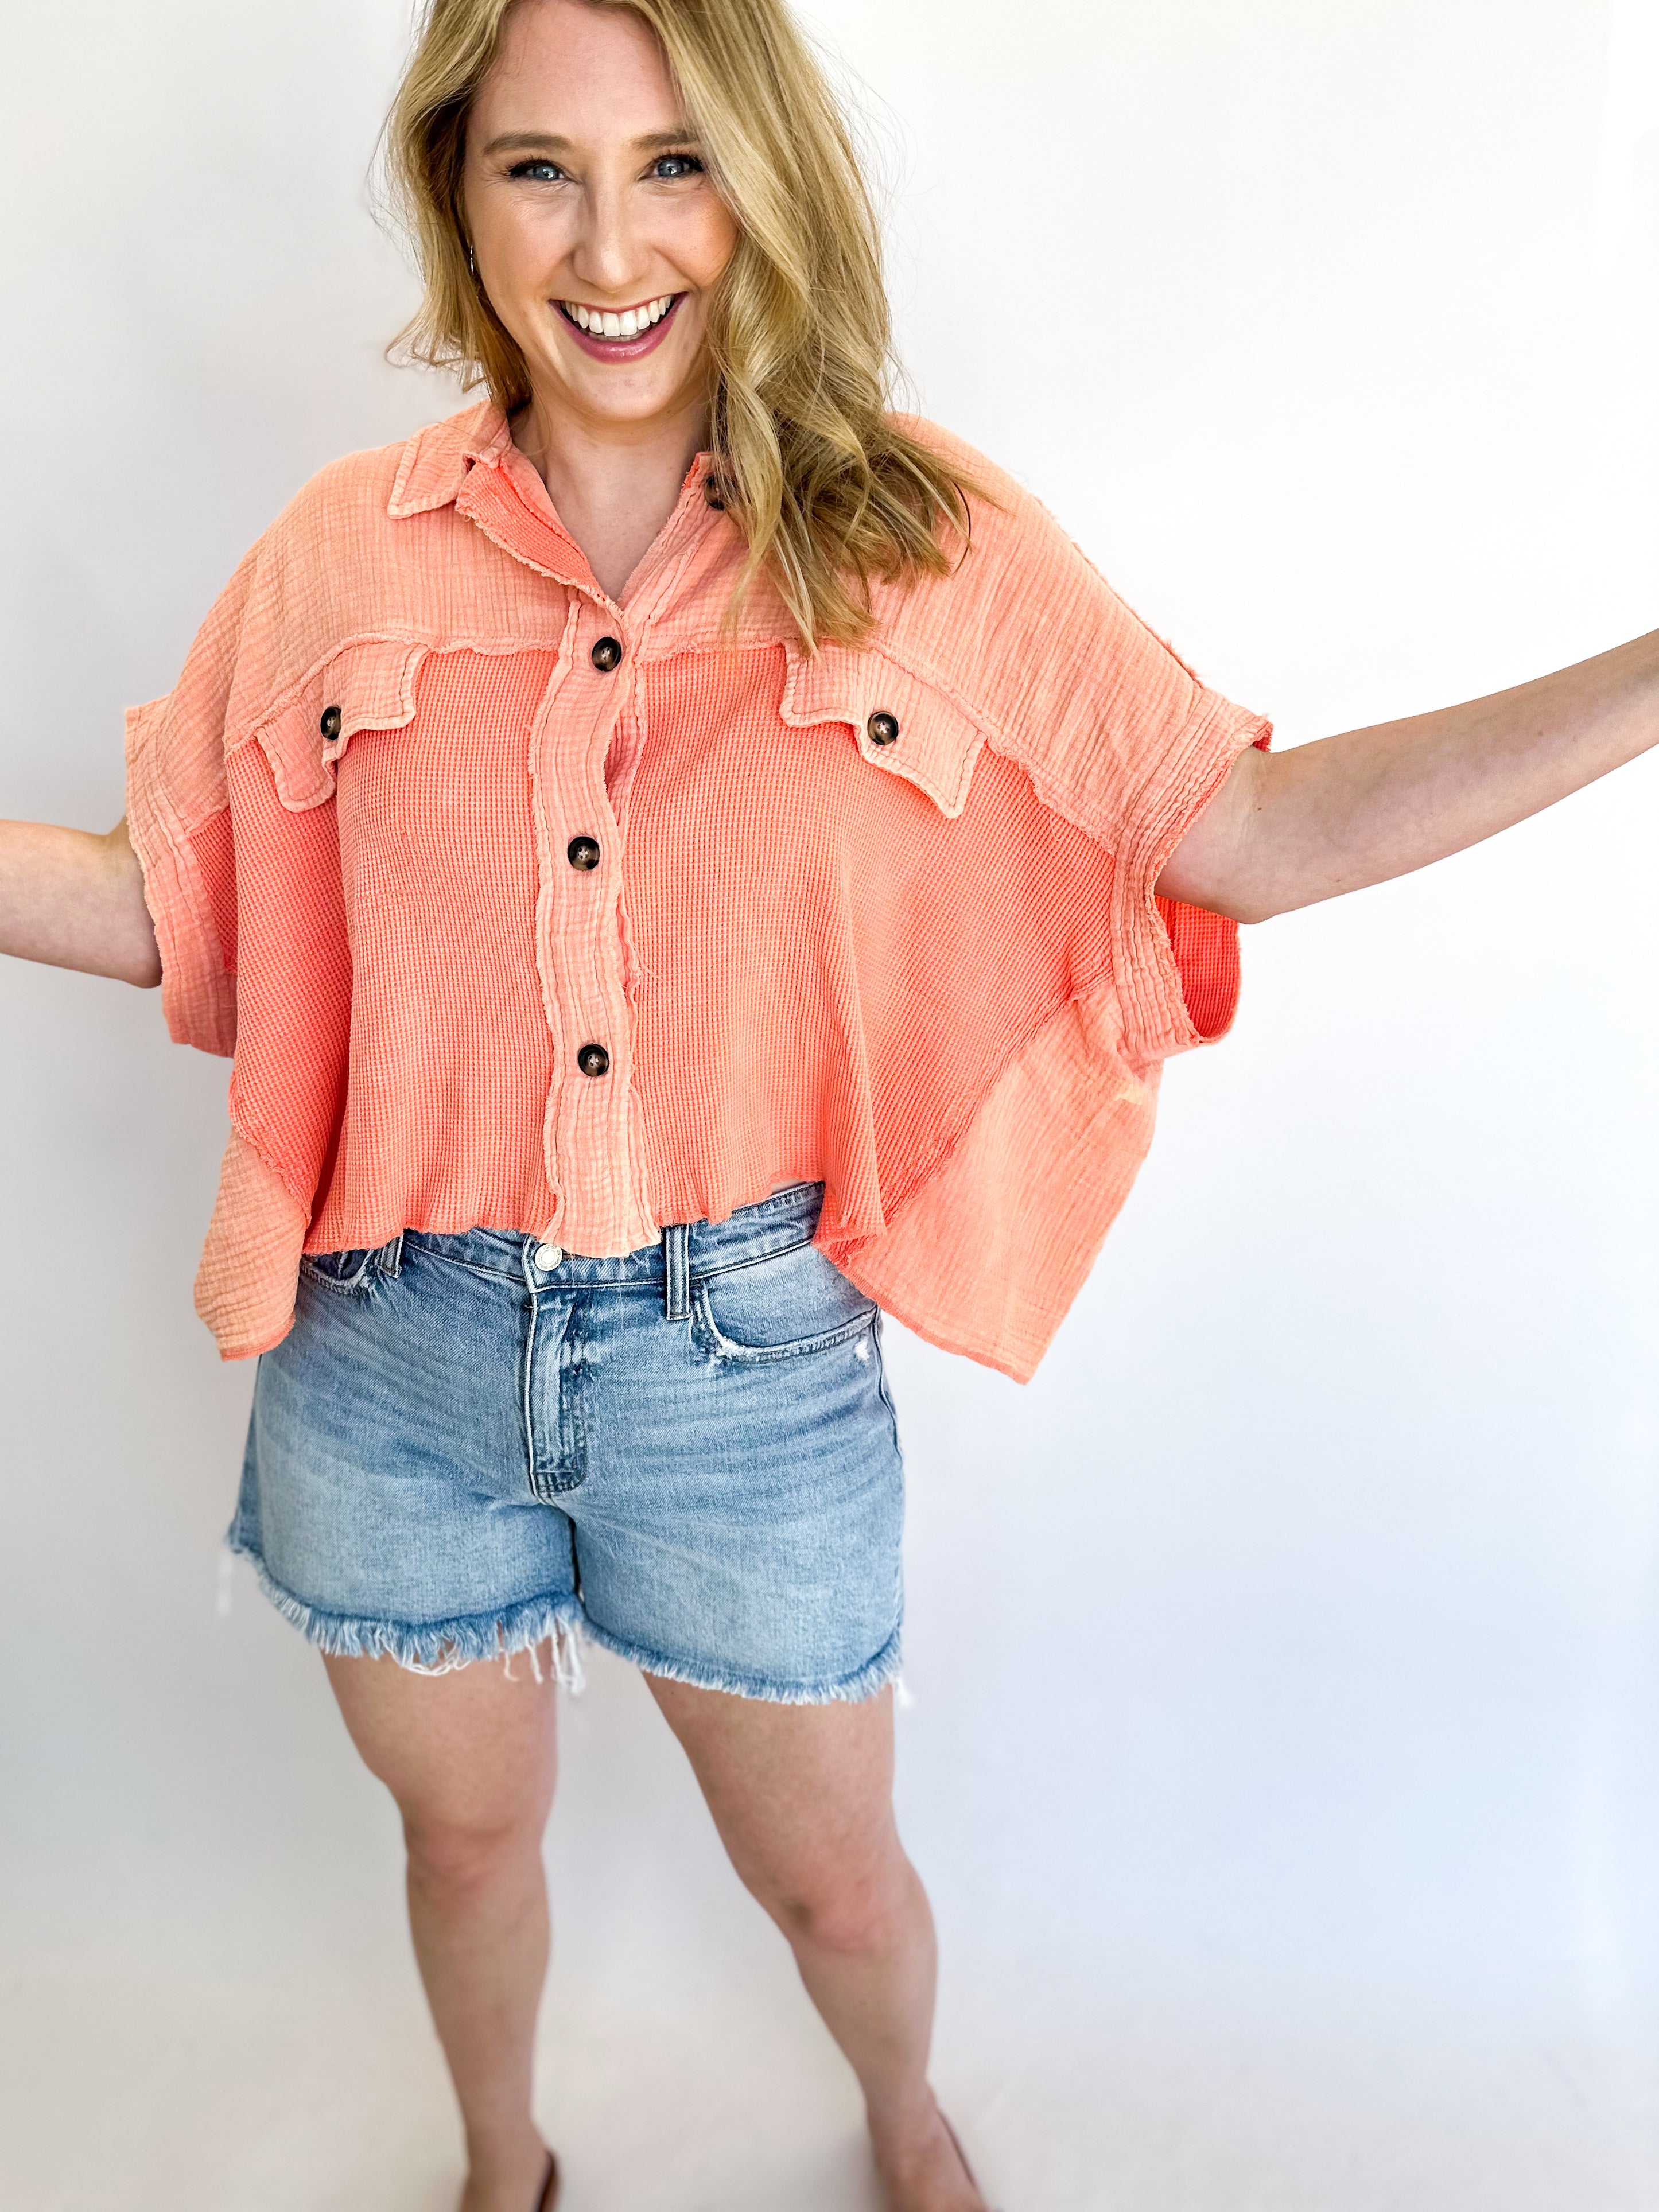 Peach Mixed Media Tee-200 Fashion Blouses-FANTASTIC FAWN-July & June Women's Fashion Boutique Located in San Antonio, Texas